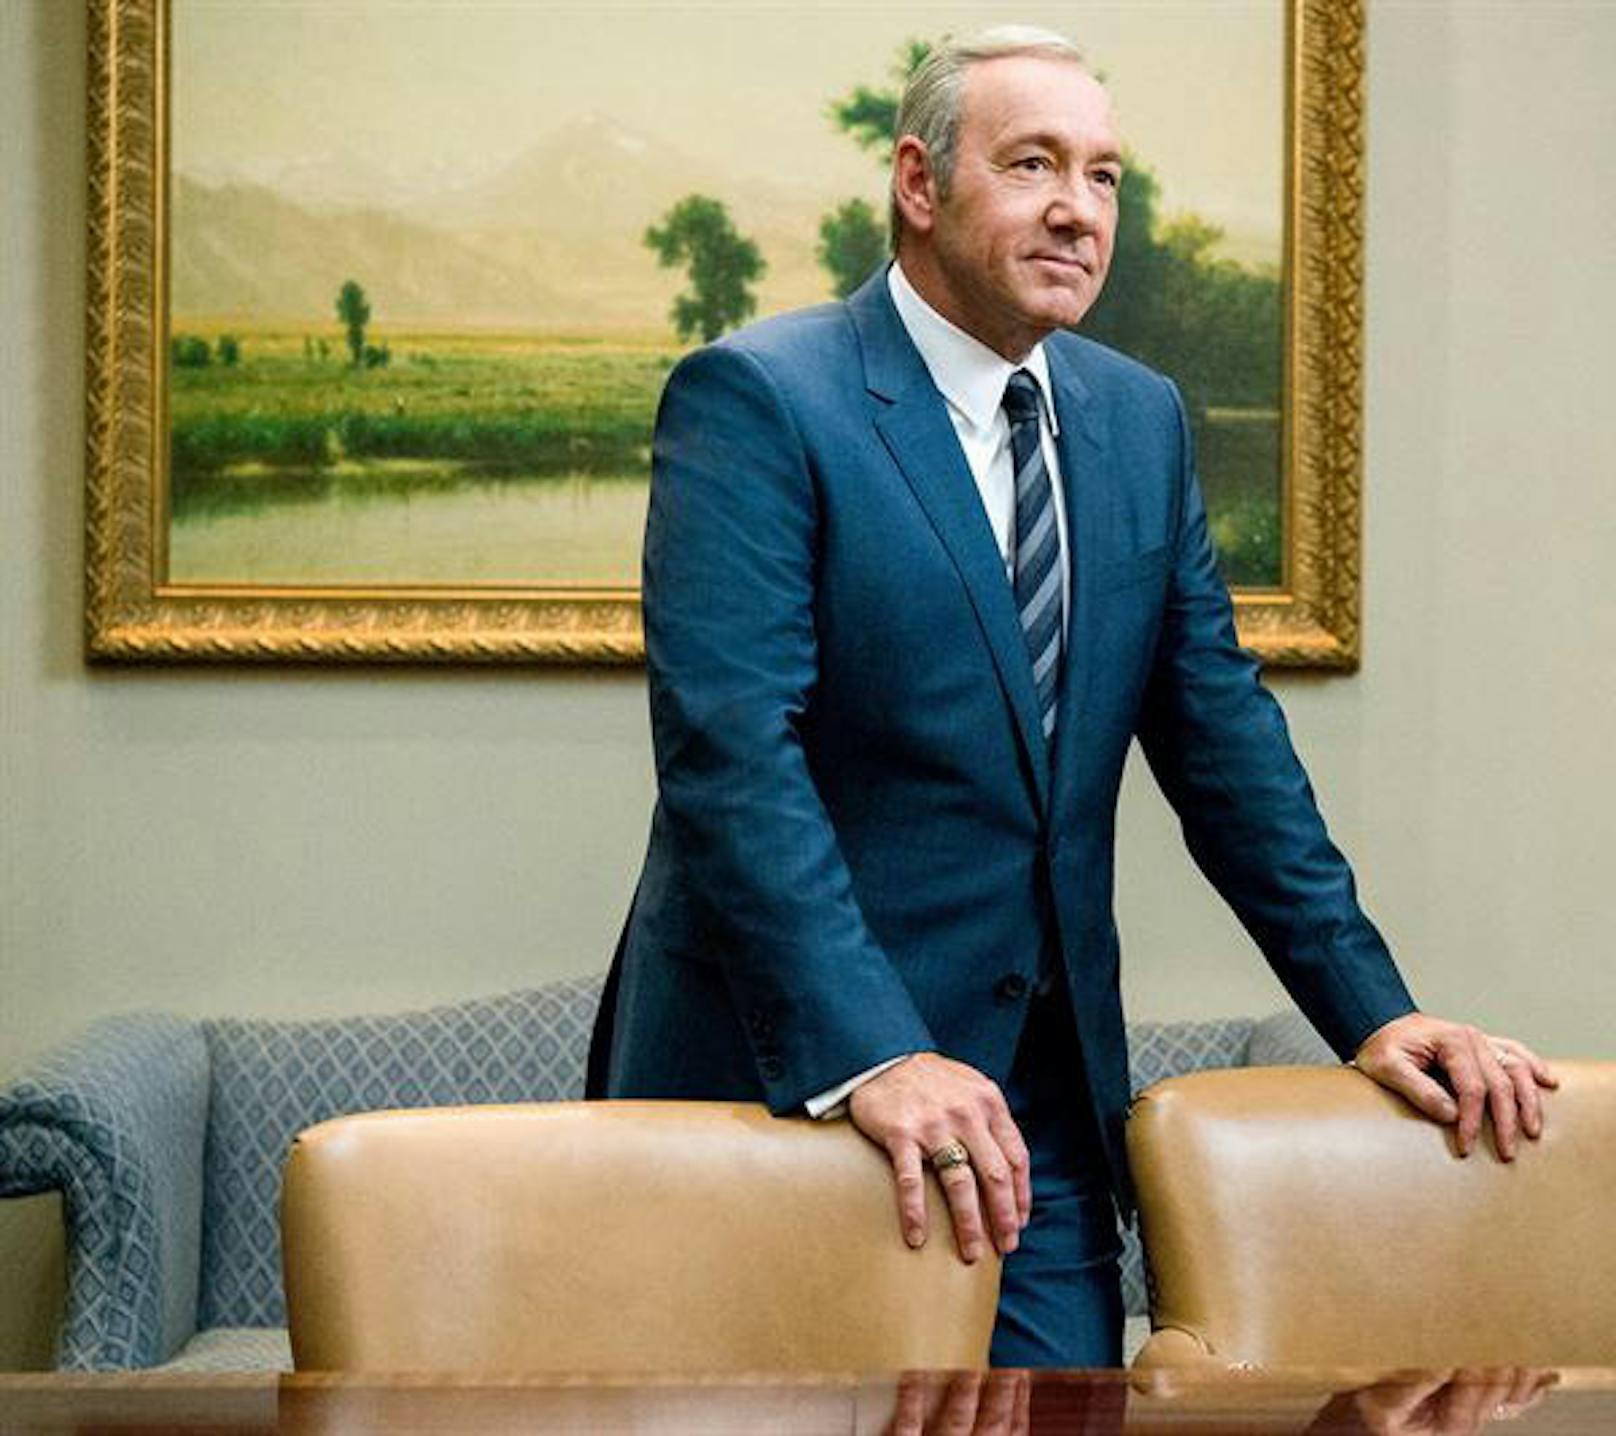 "House of Cards": Kevin Spacey als Frank Underwood